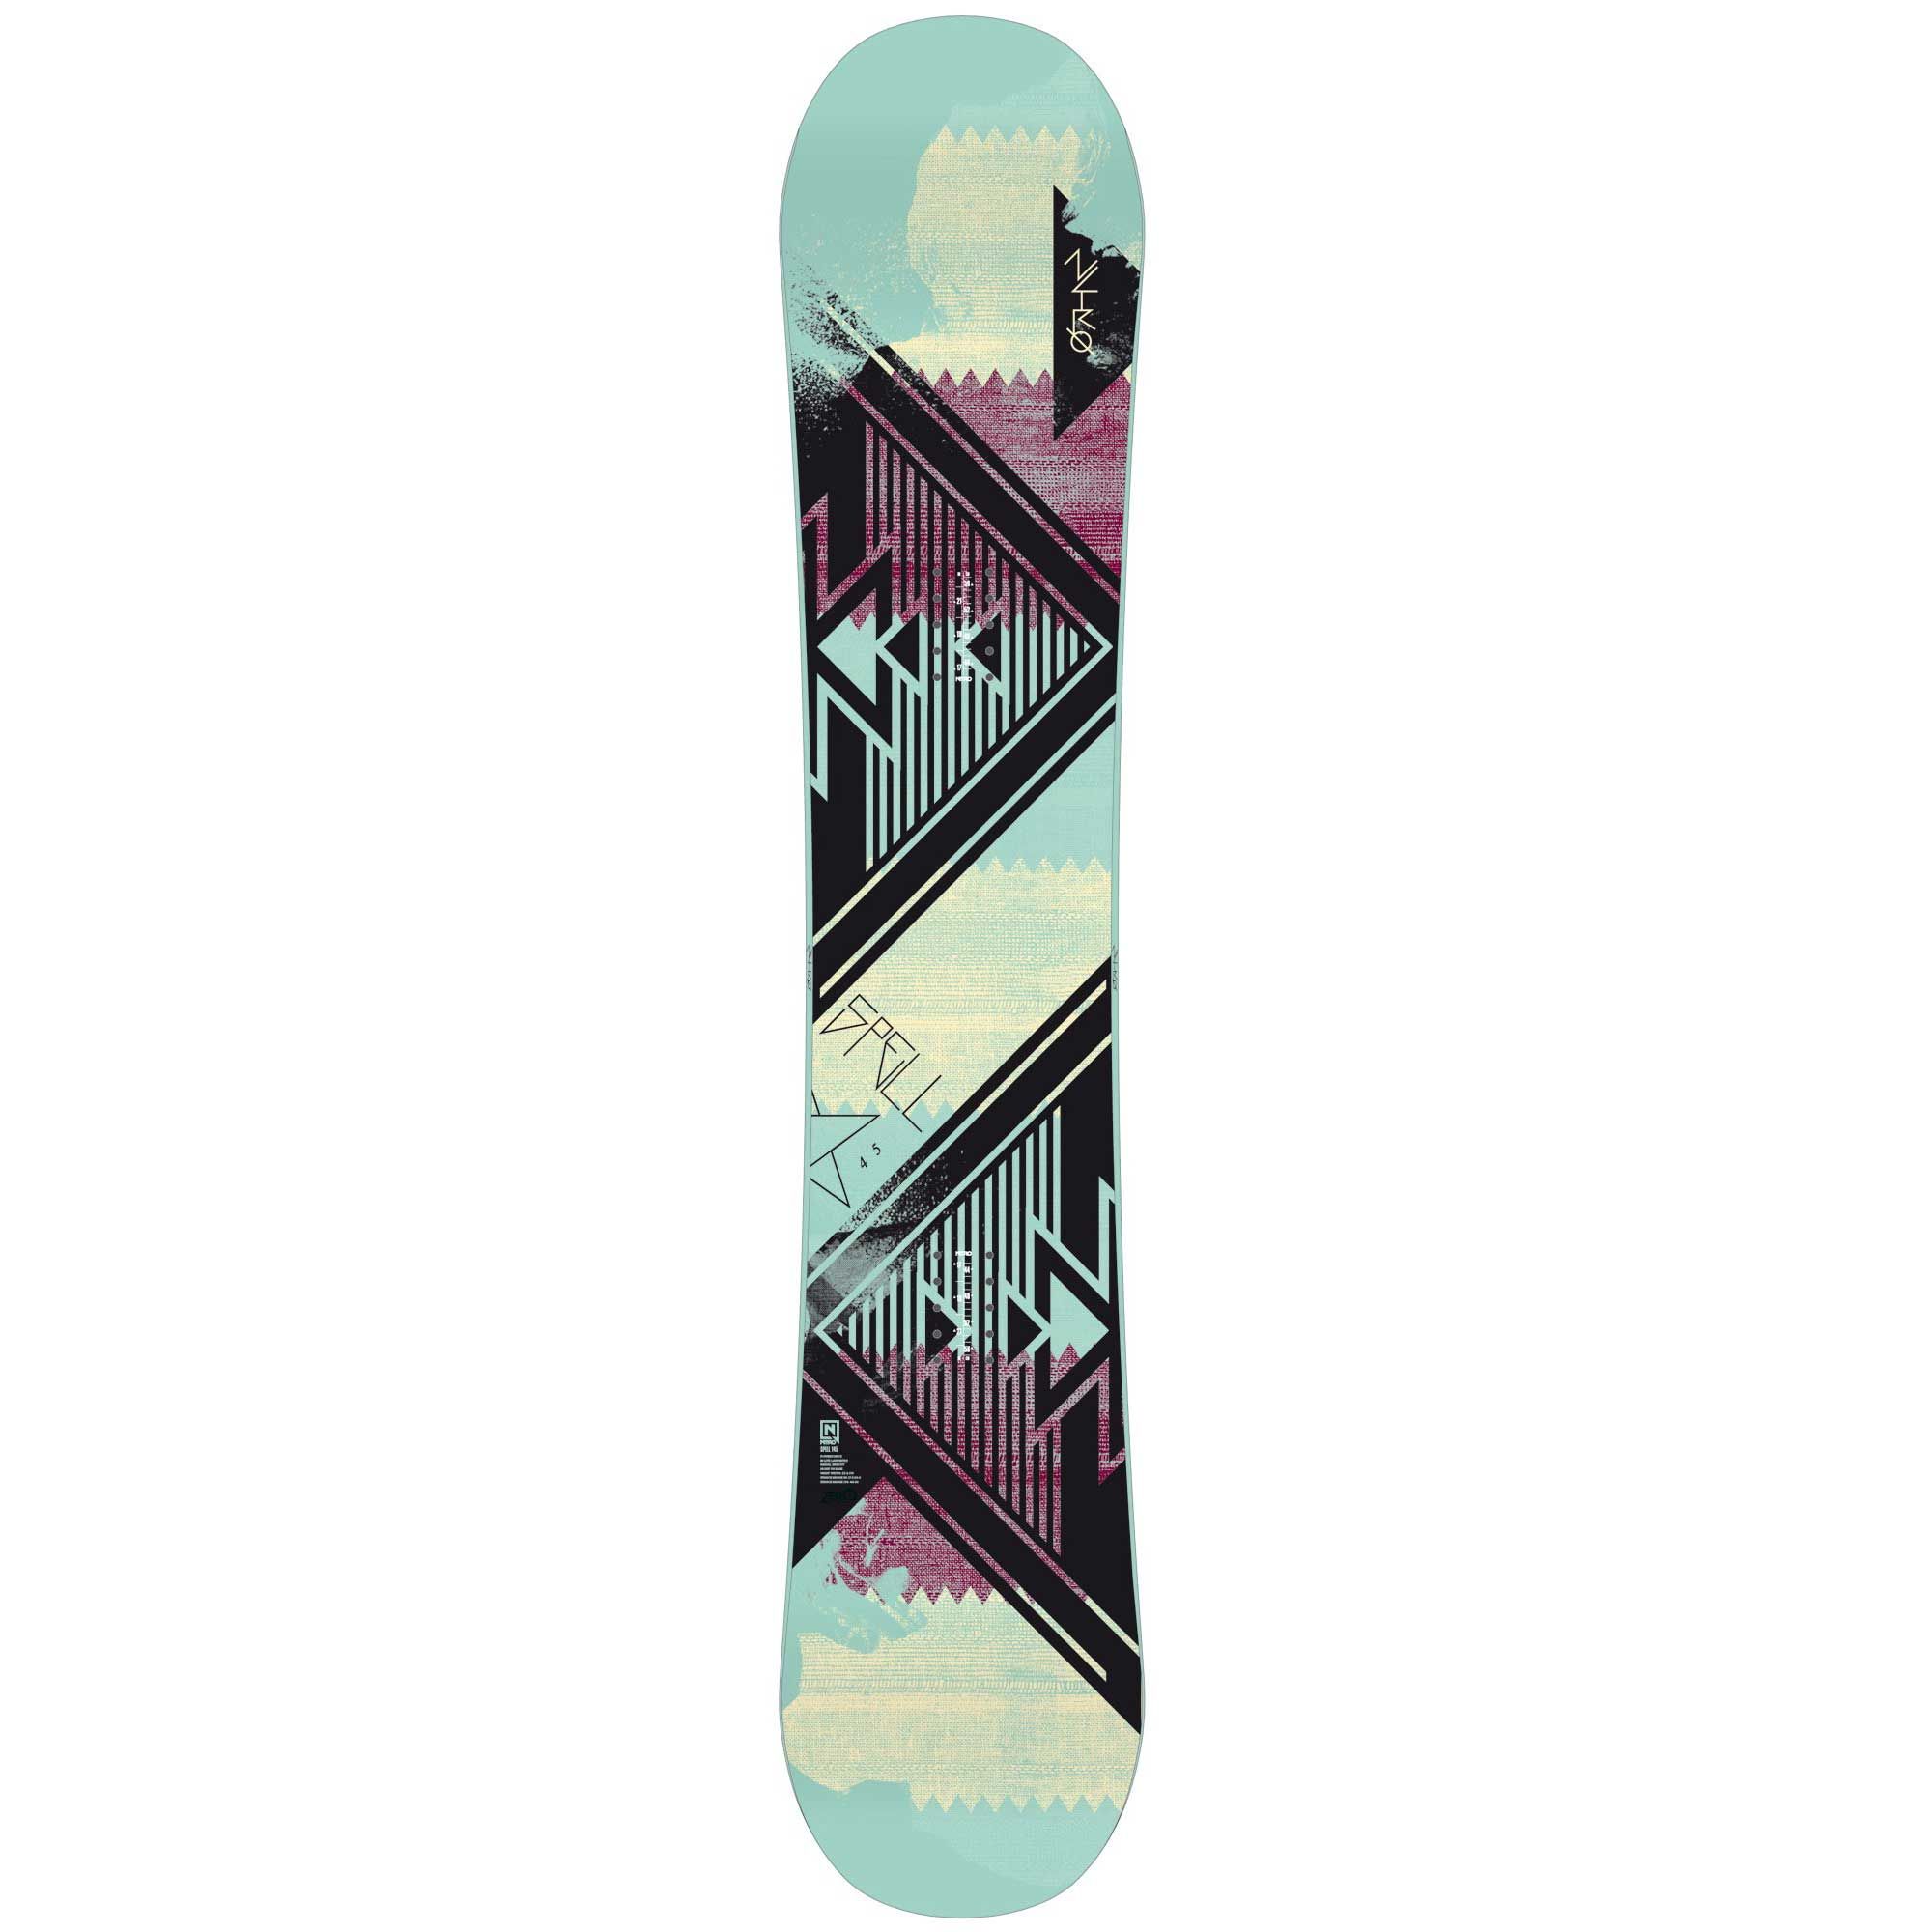 Pack Planche snowboard Spell + Fixations